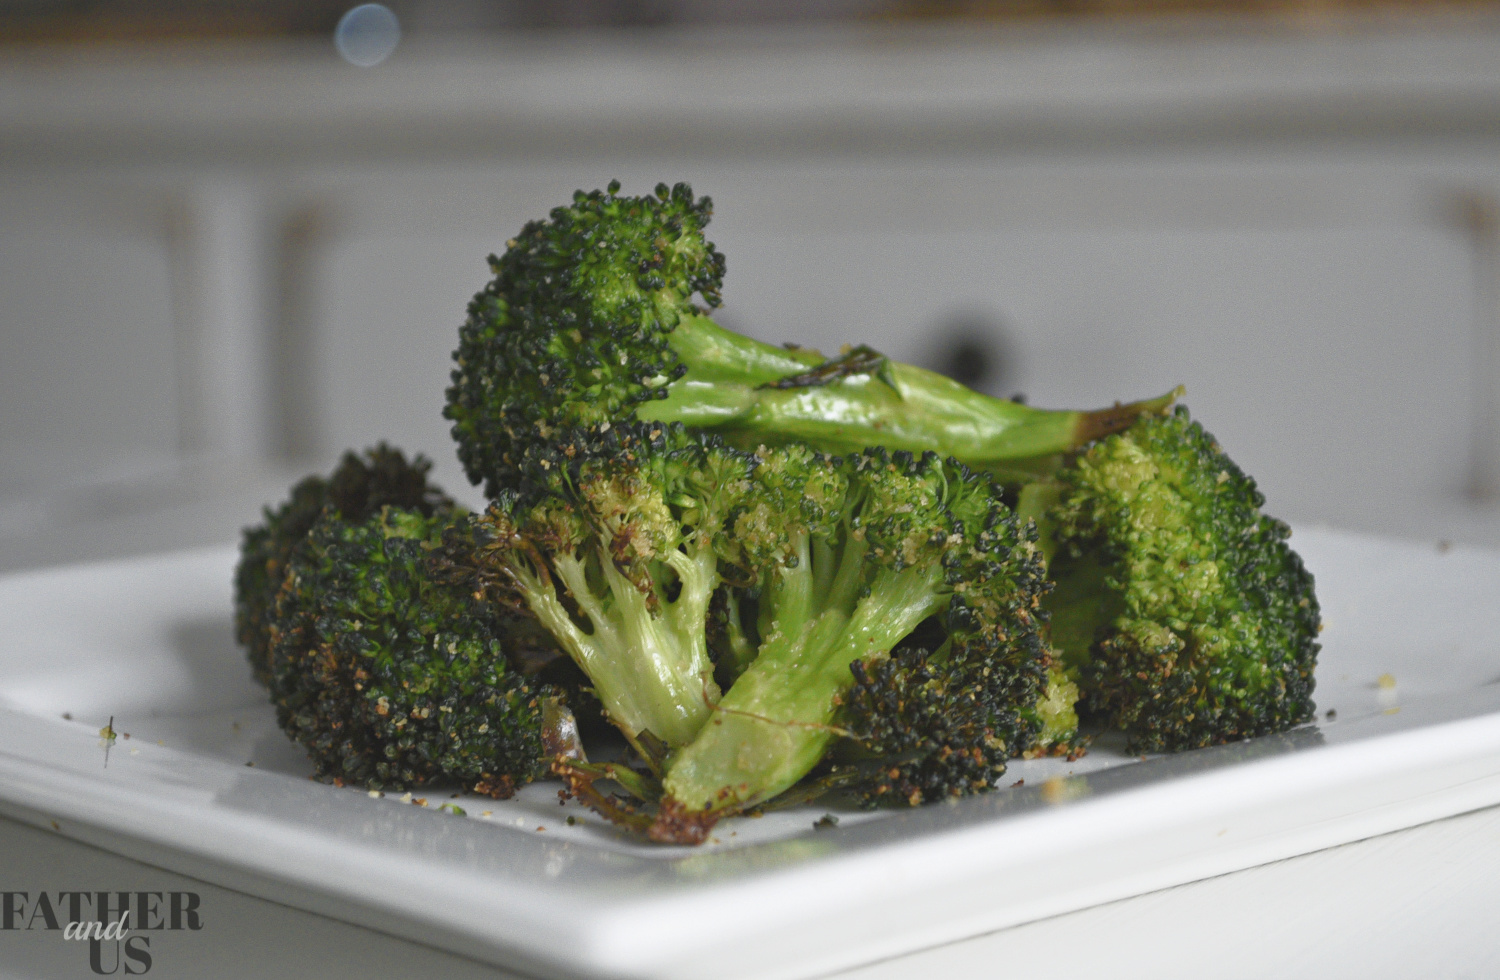 Air Fryer Broccoli is a great healthy and easy side dish